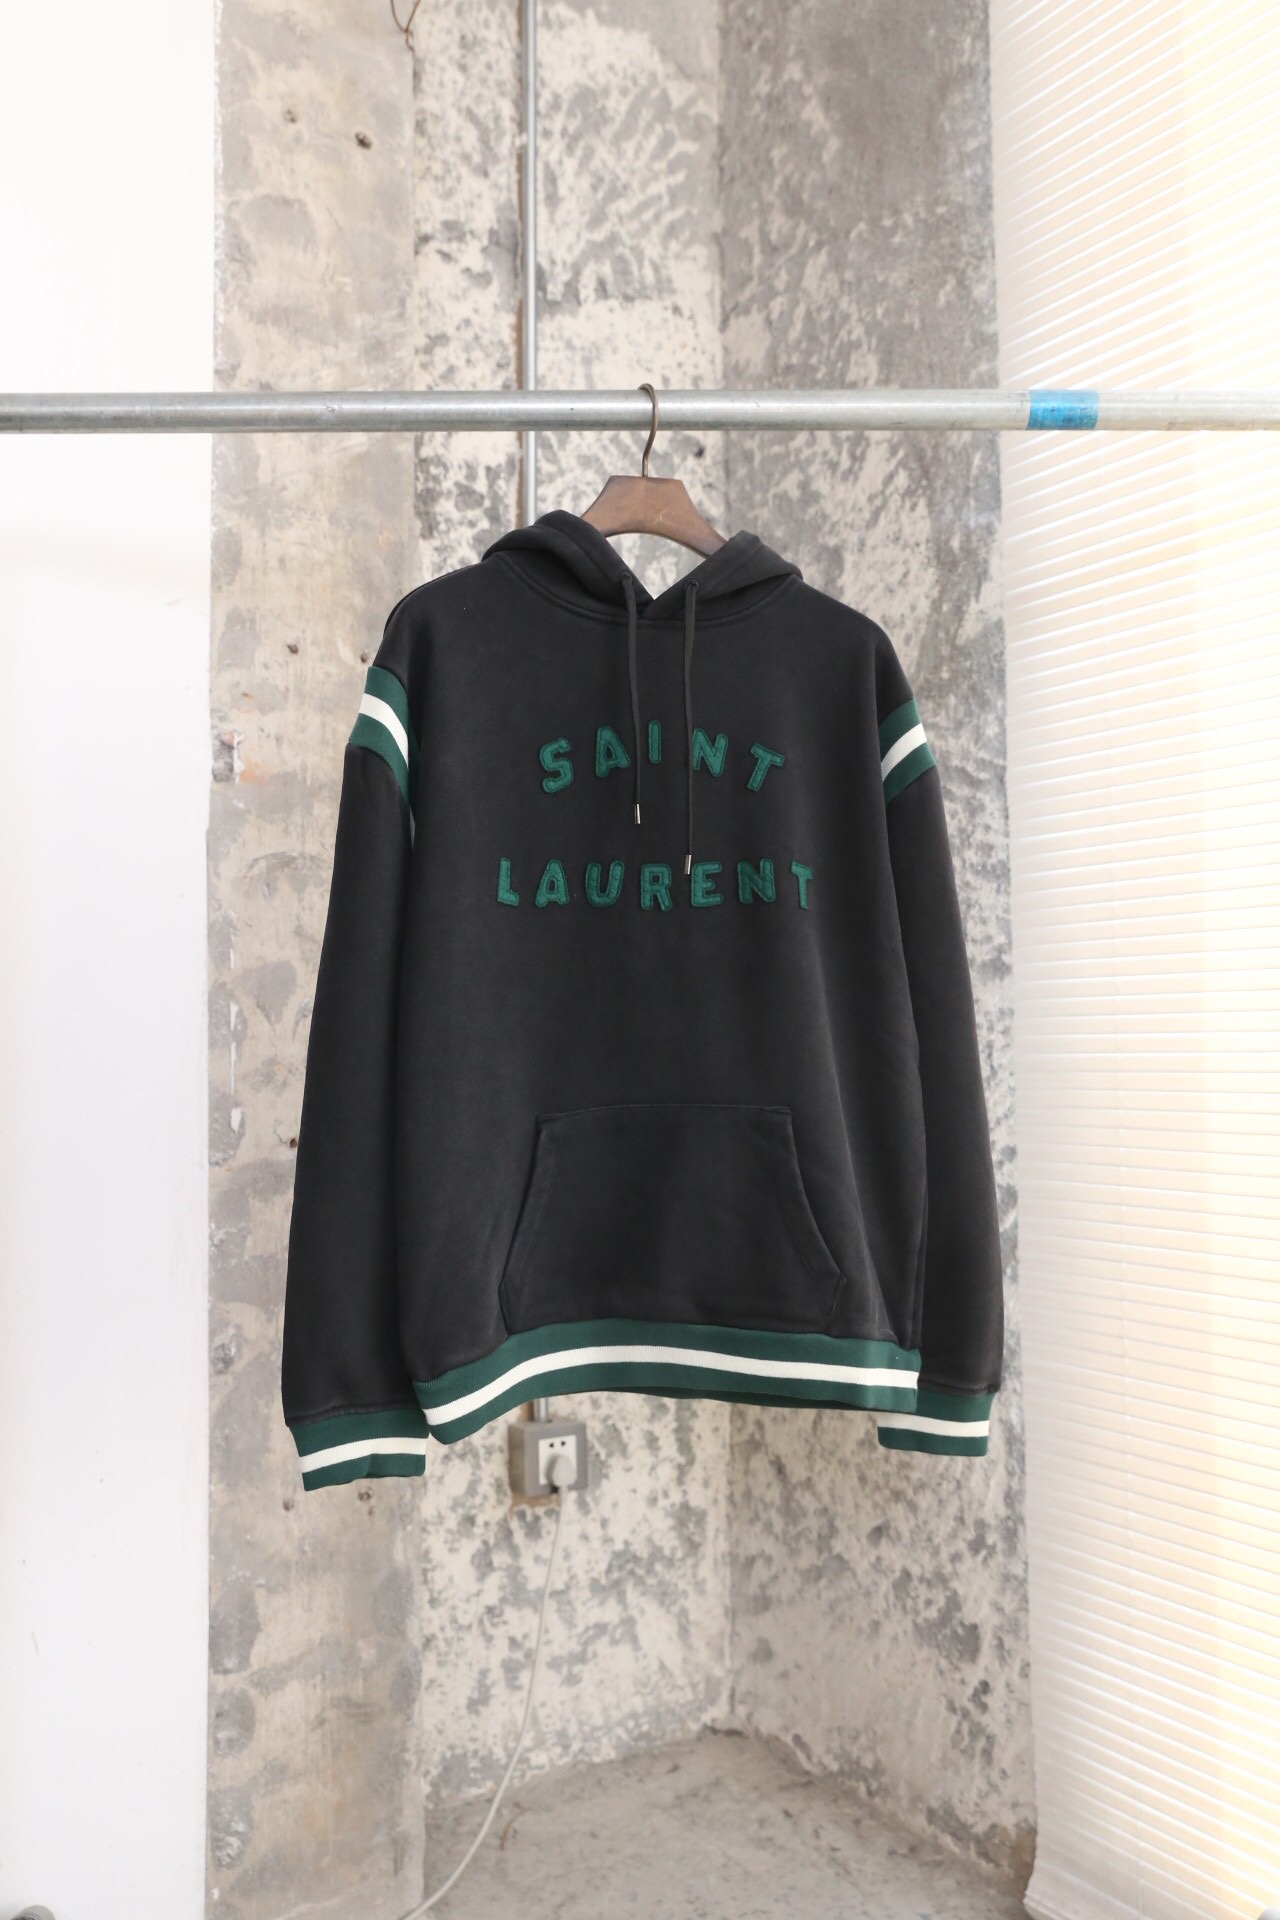 Yves Saint Laurent Clothing Hoodies Black Green White Embroidery Cotton Vintage Hooded Top